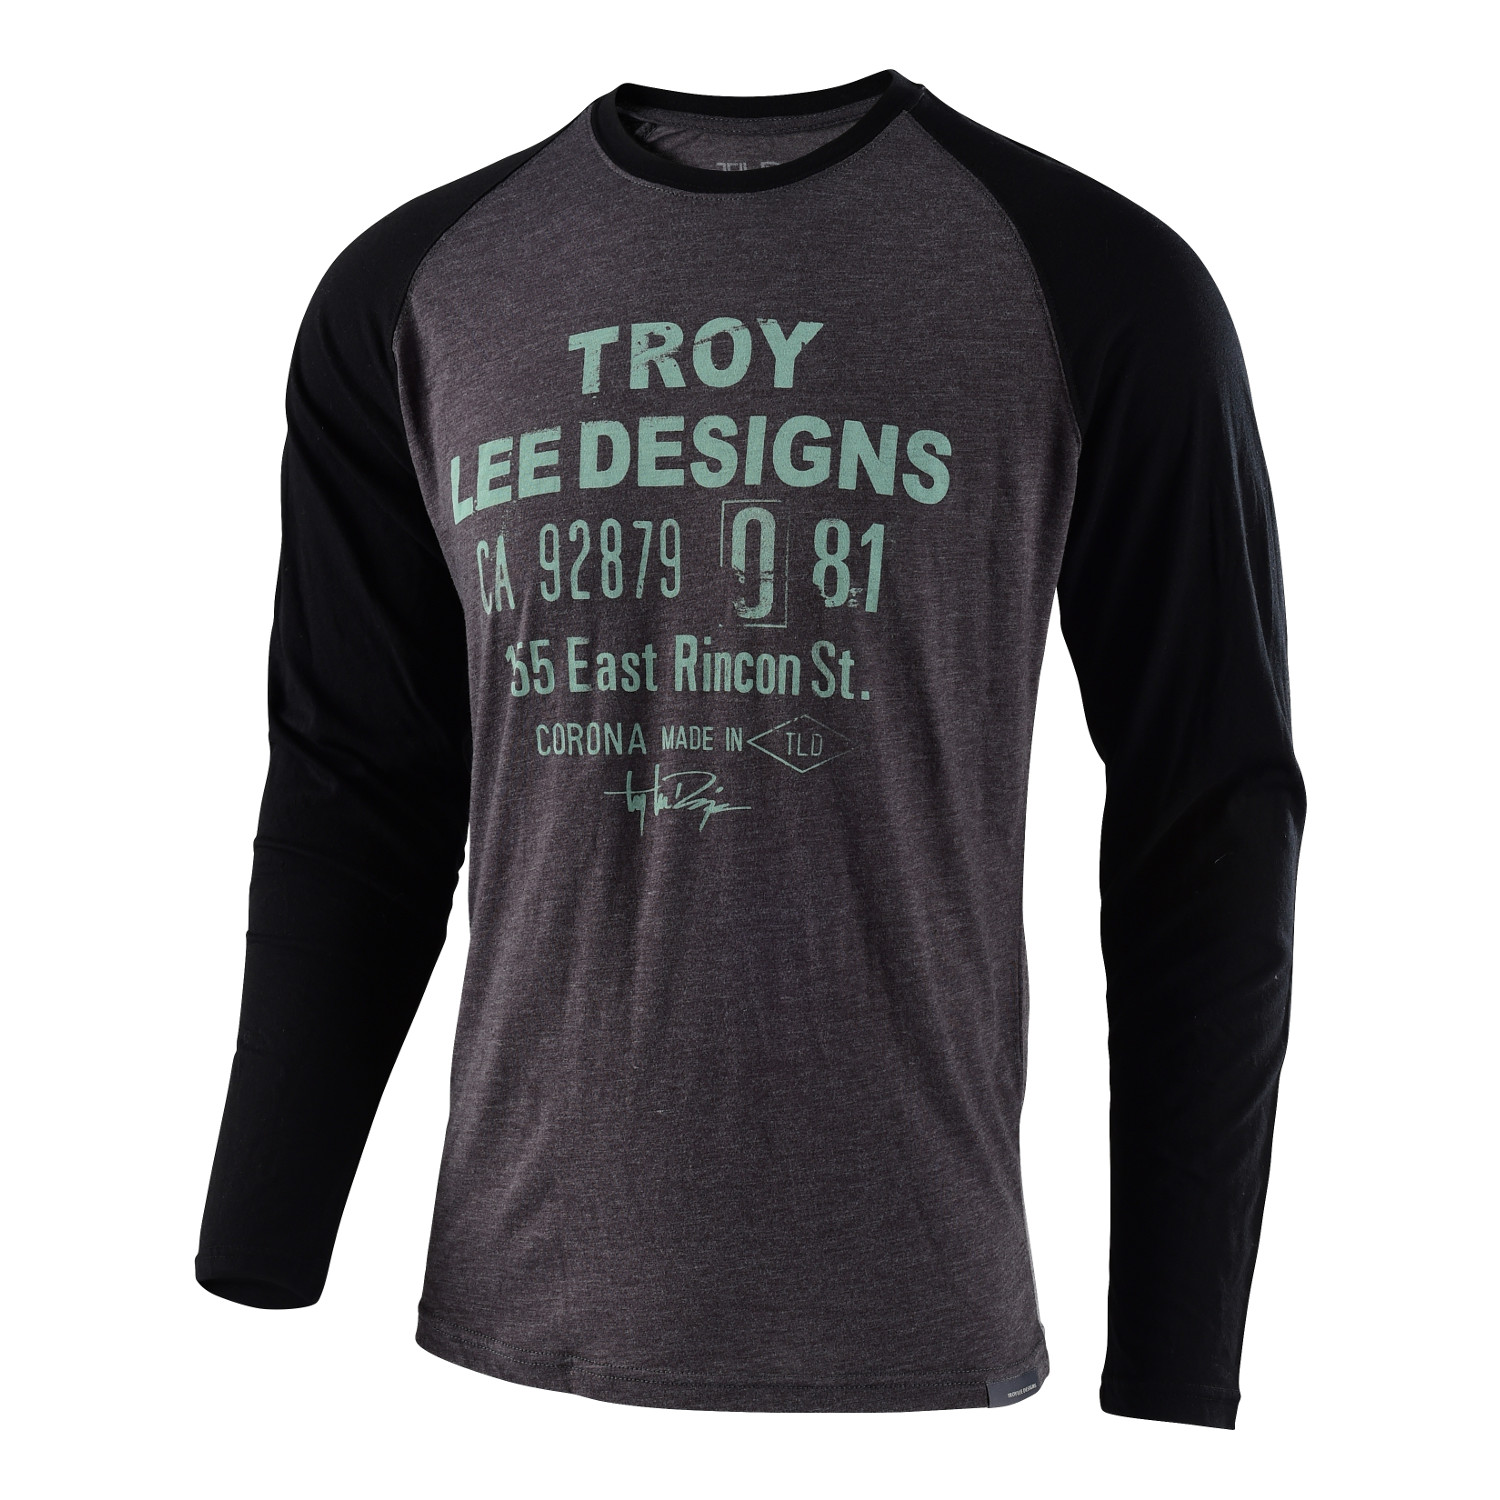 Troy Lee Designs T-Shirt Manches Longues Cargo Charcoal/Black